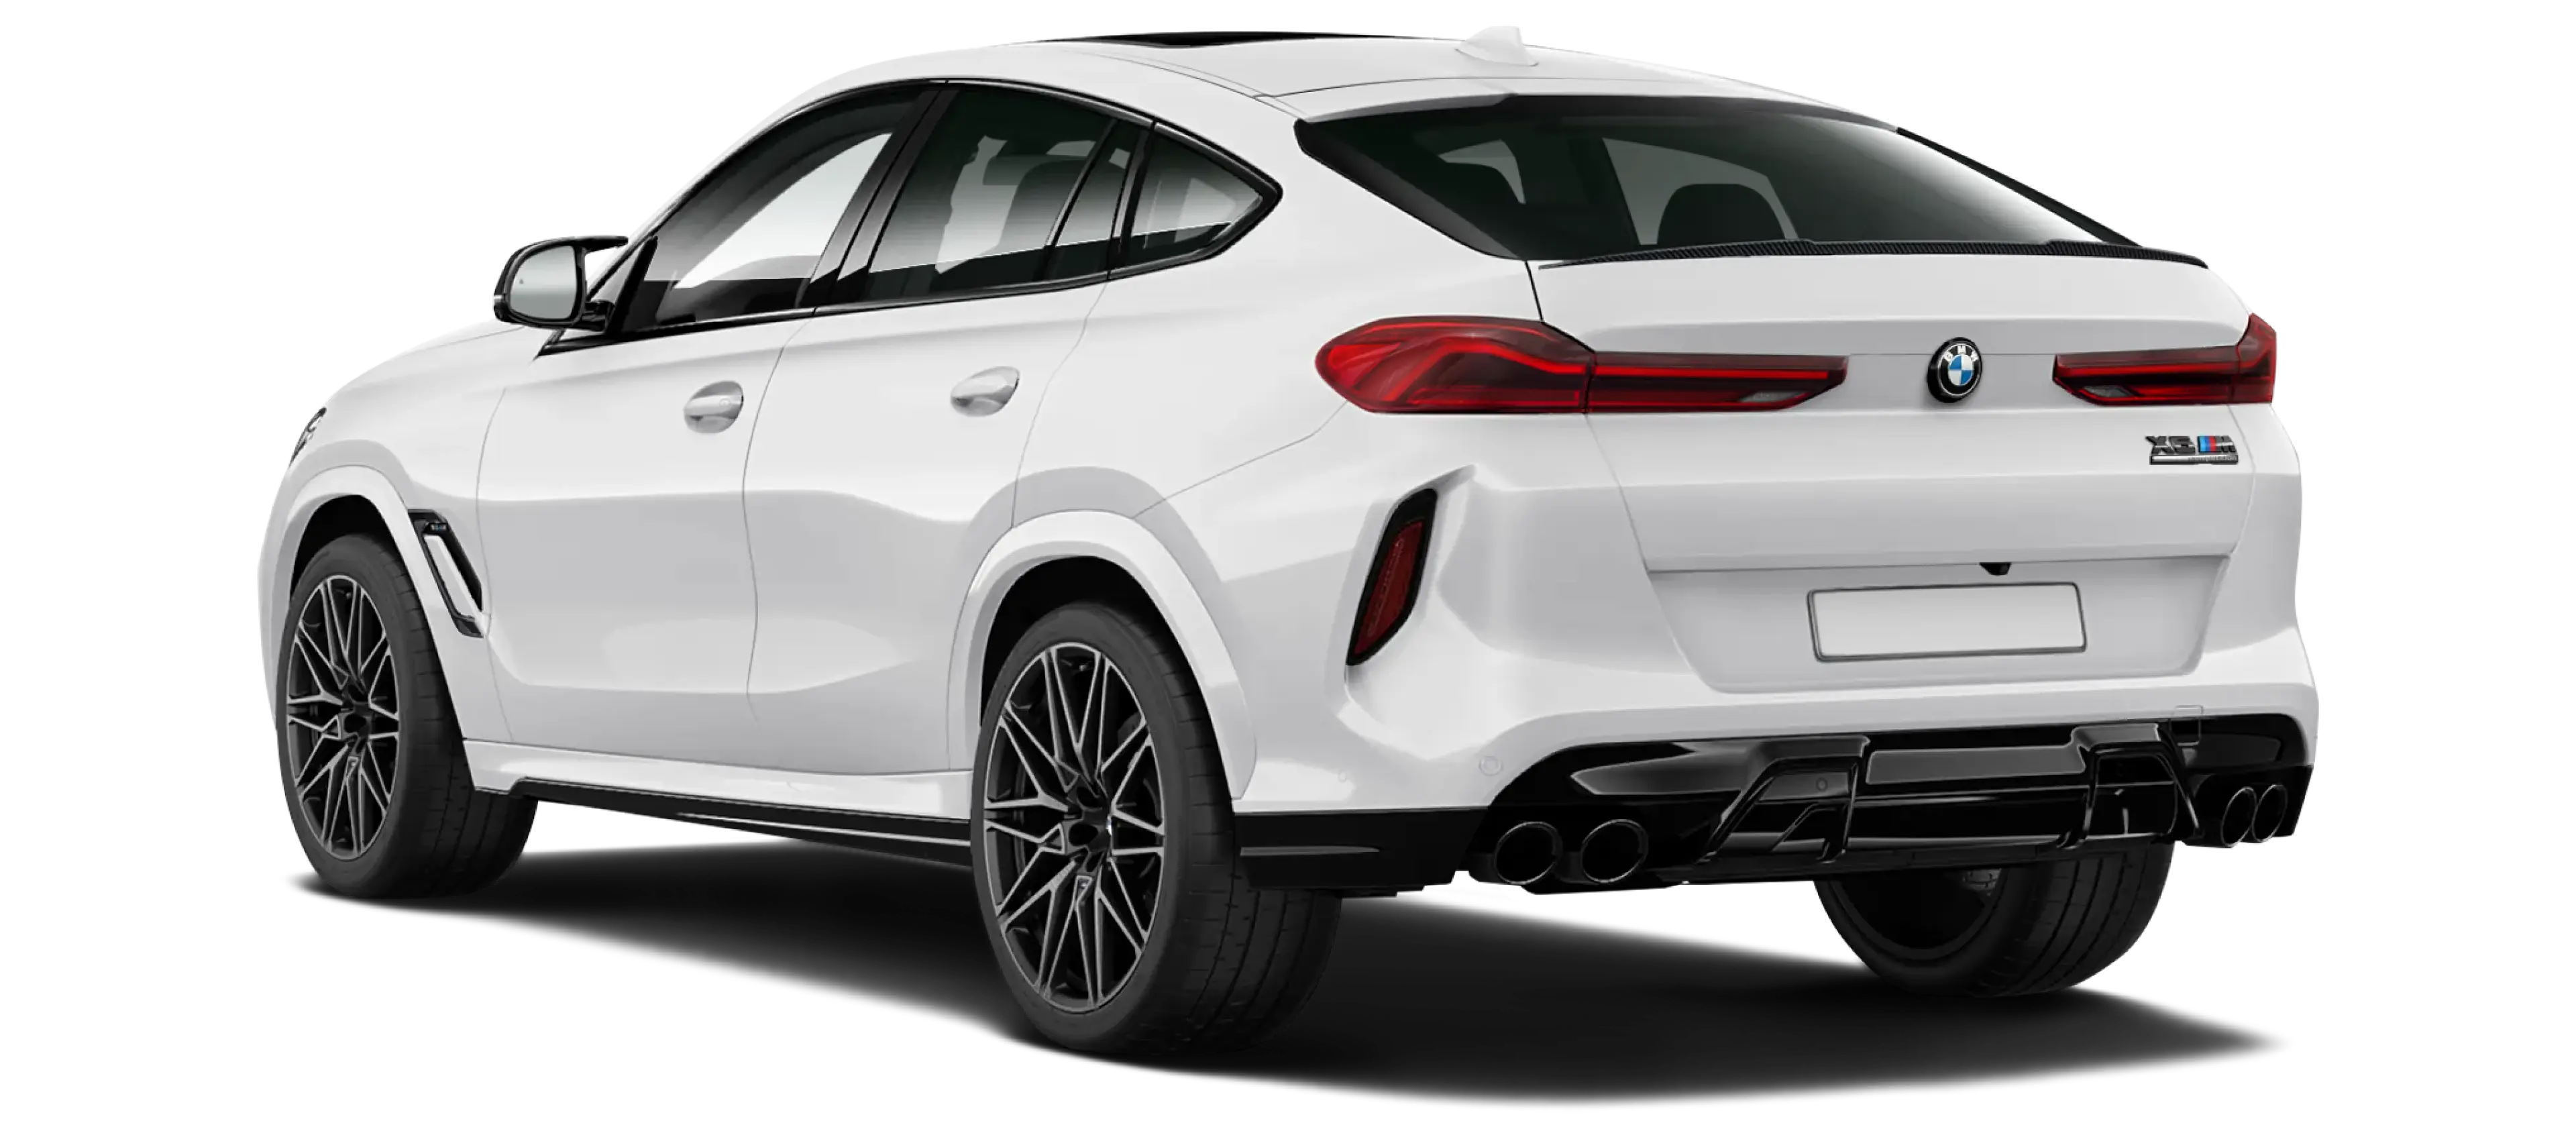 BMW X6M F96 LCI 2023 stock rear view in White mineral